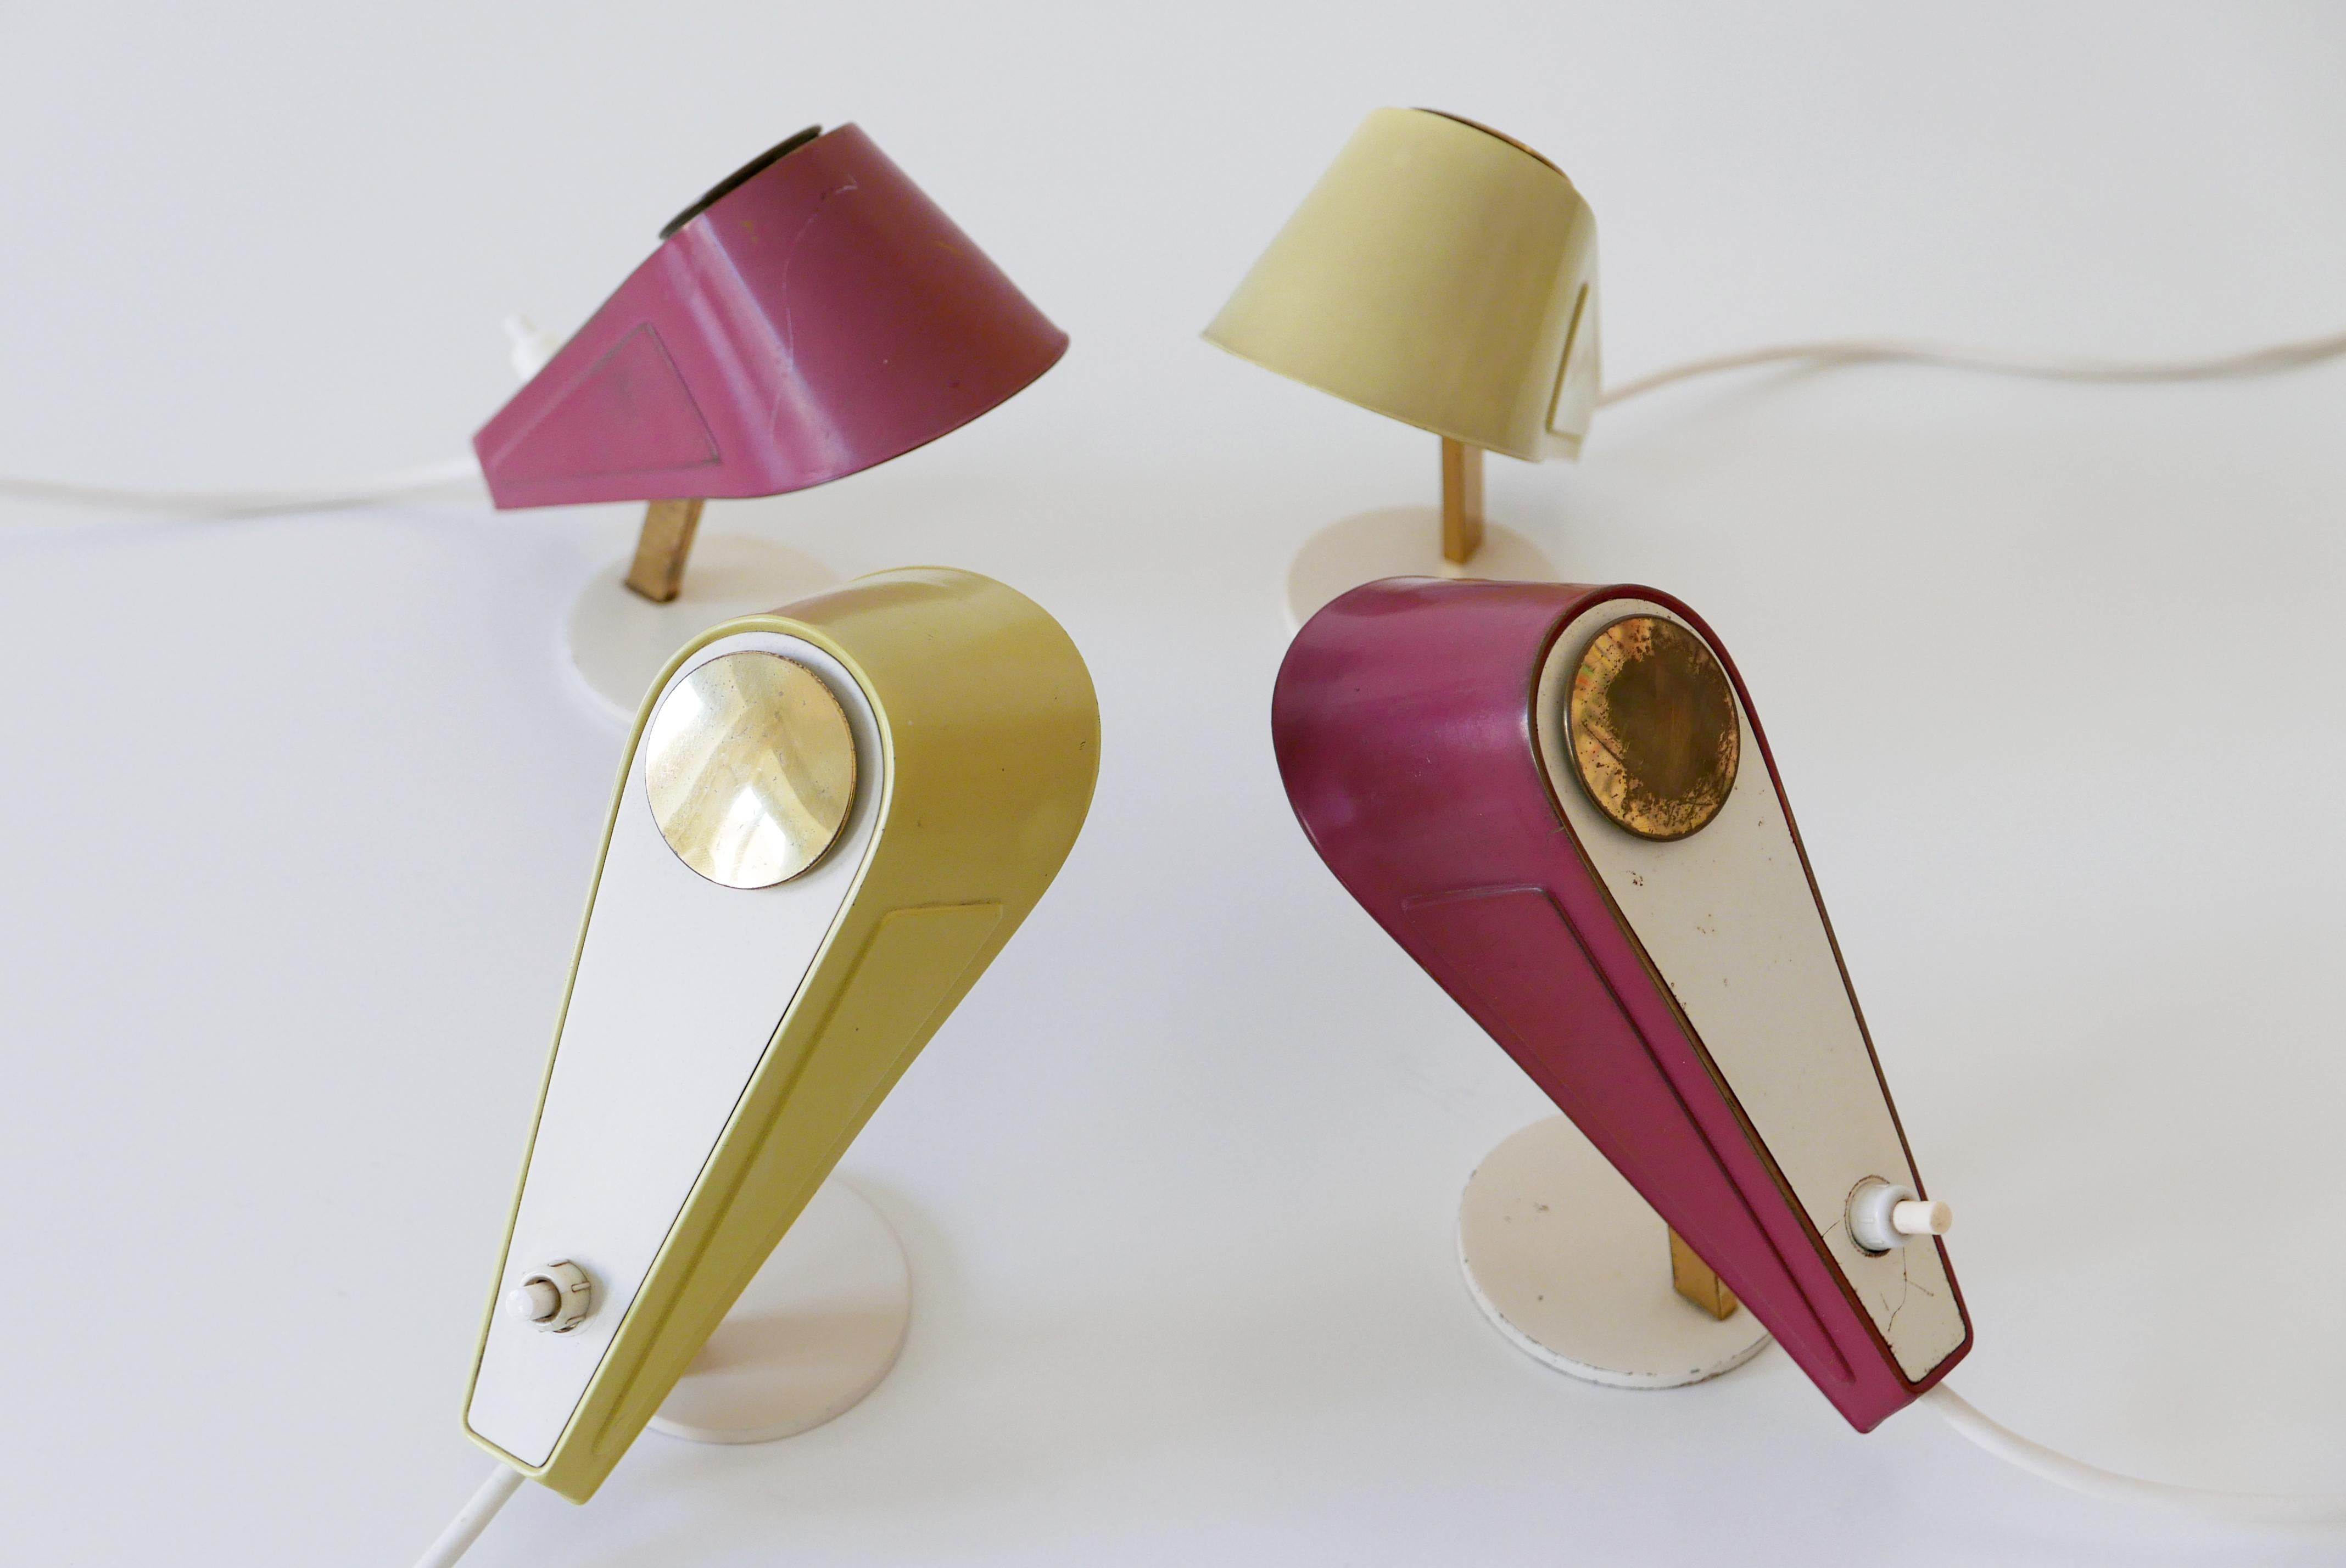 Mid-Century Modern Set of Four Lovely Mid-Century Sparrow Bedside Table Lamps, 1950s, Germany For Sale